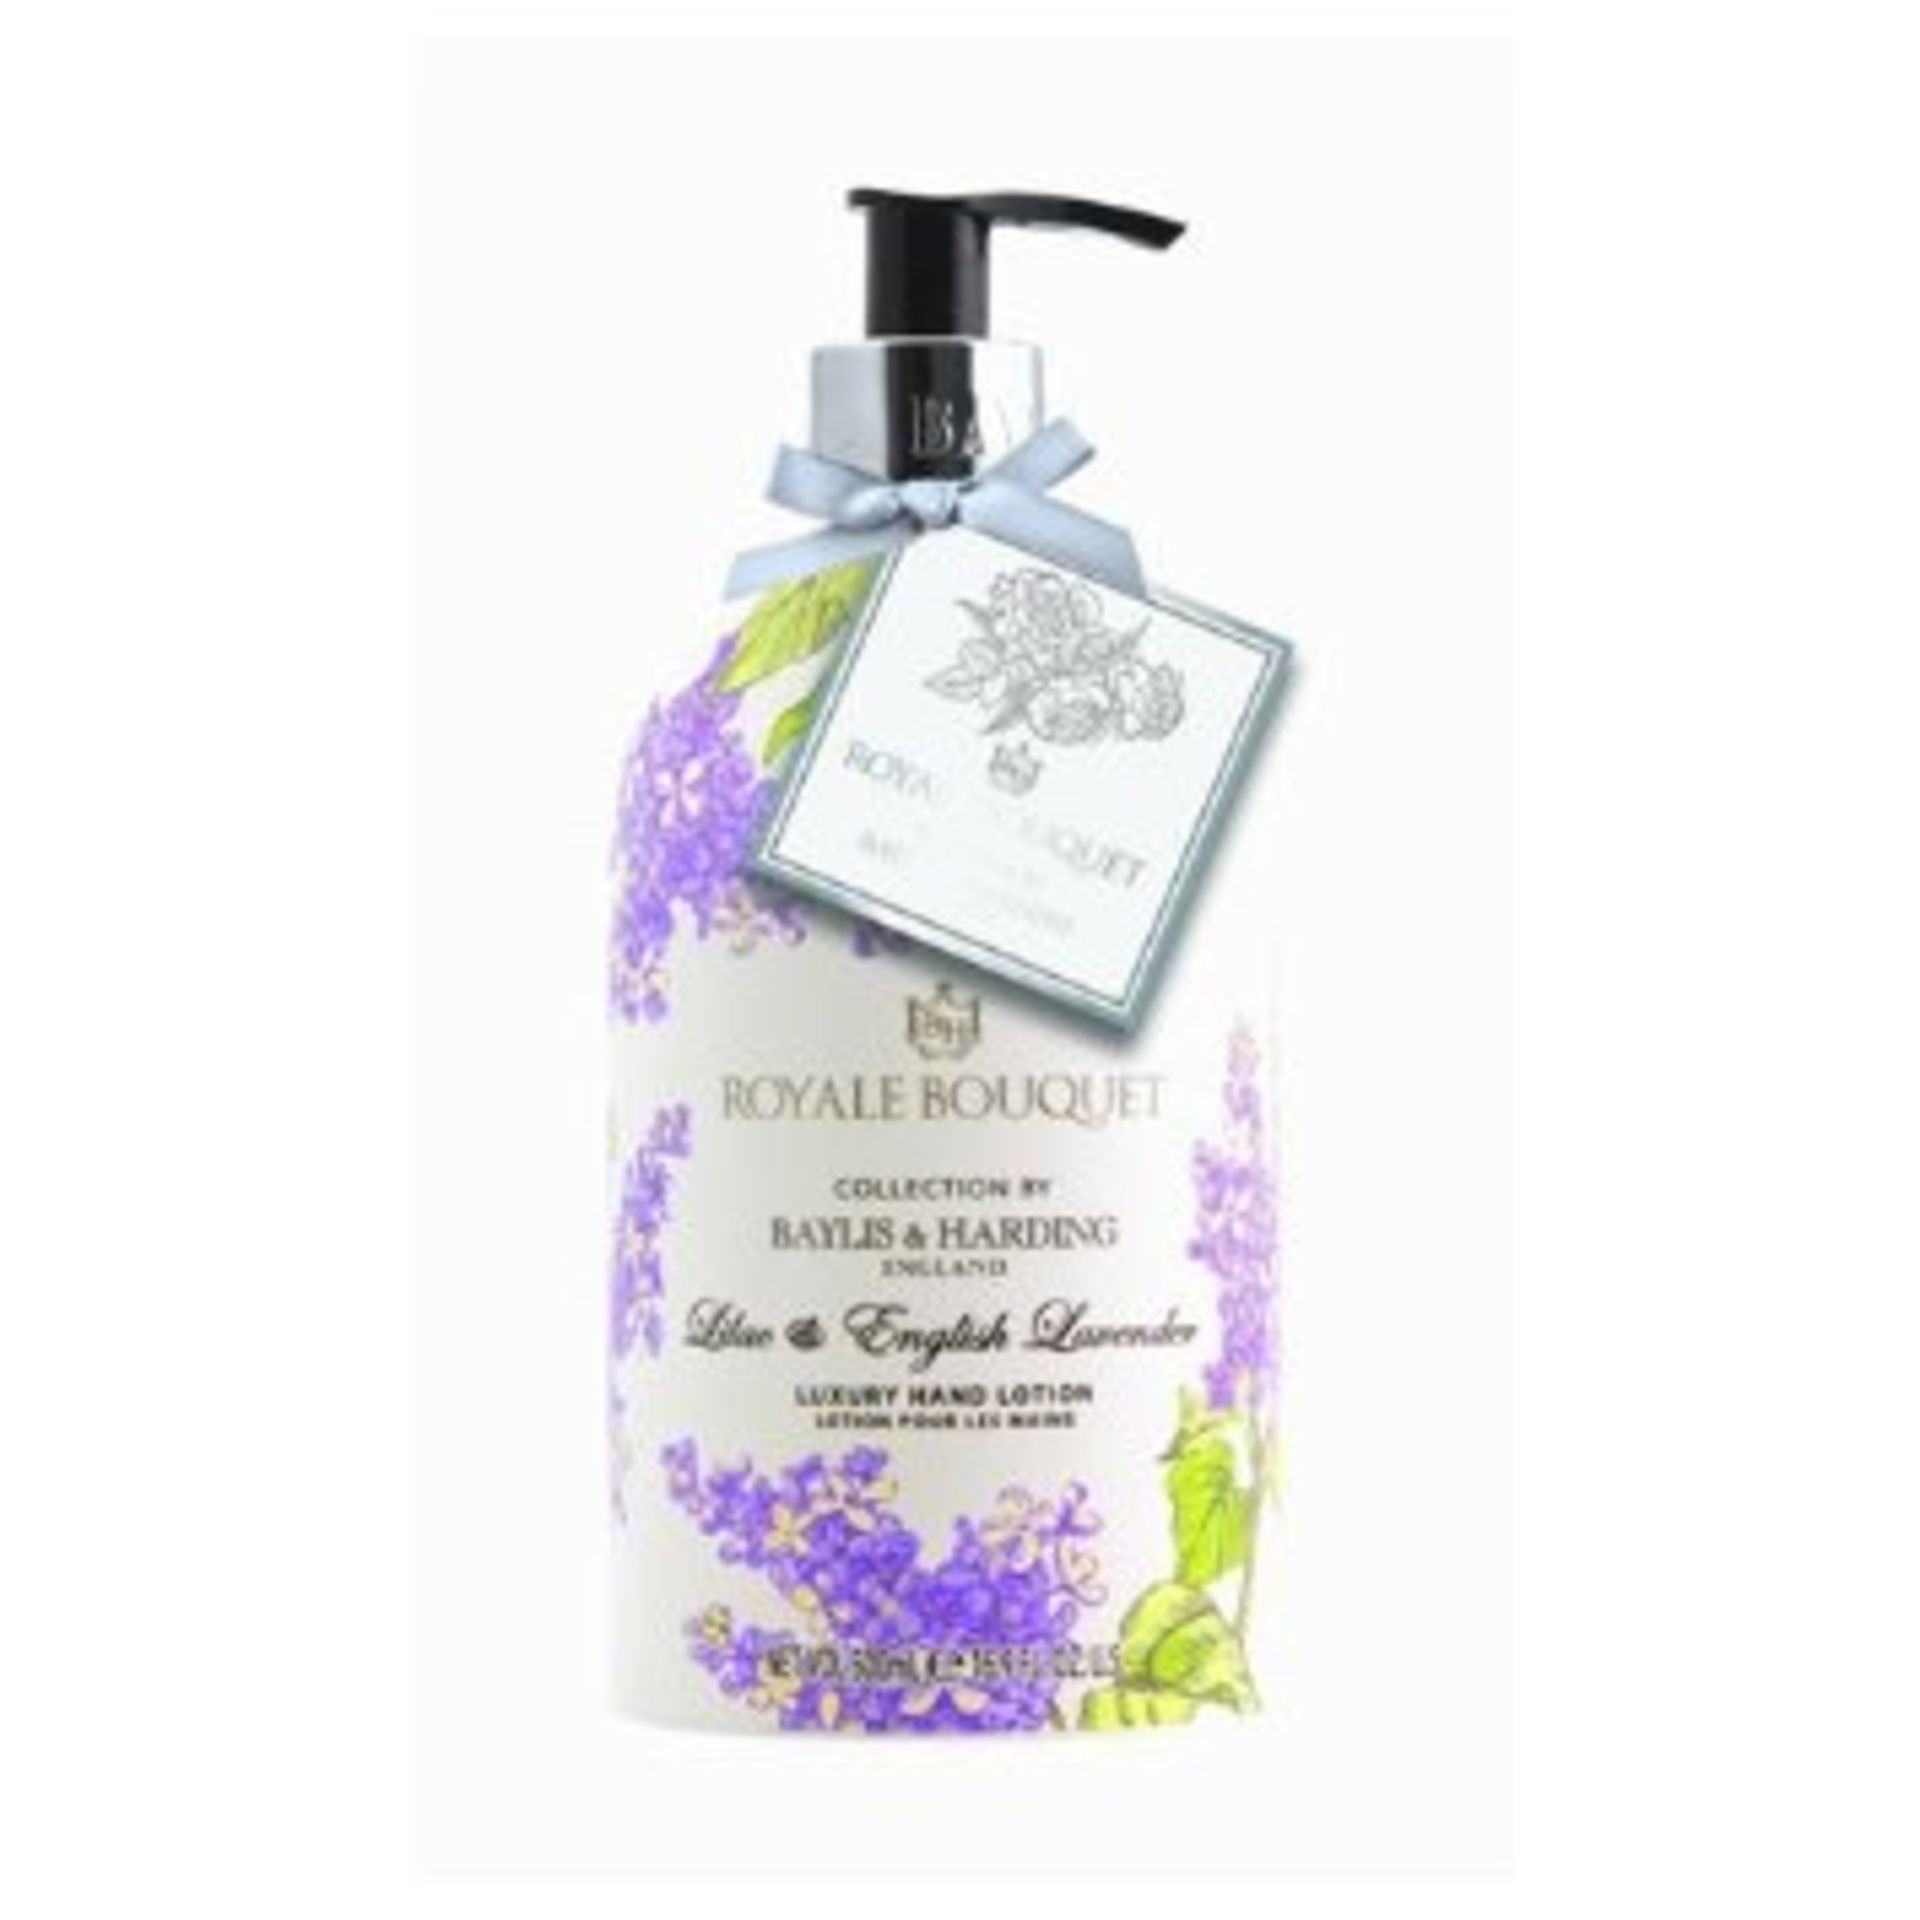 V Brand New 15 x 500ml Baylis and Harding Lilac and English Lavender Hand Lotion Total ISP/RRP £45.